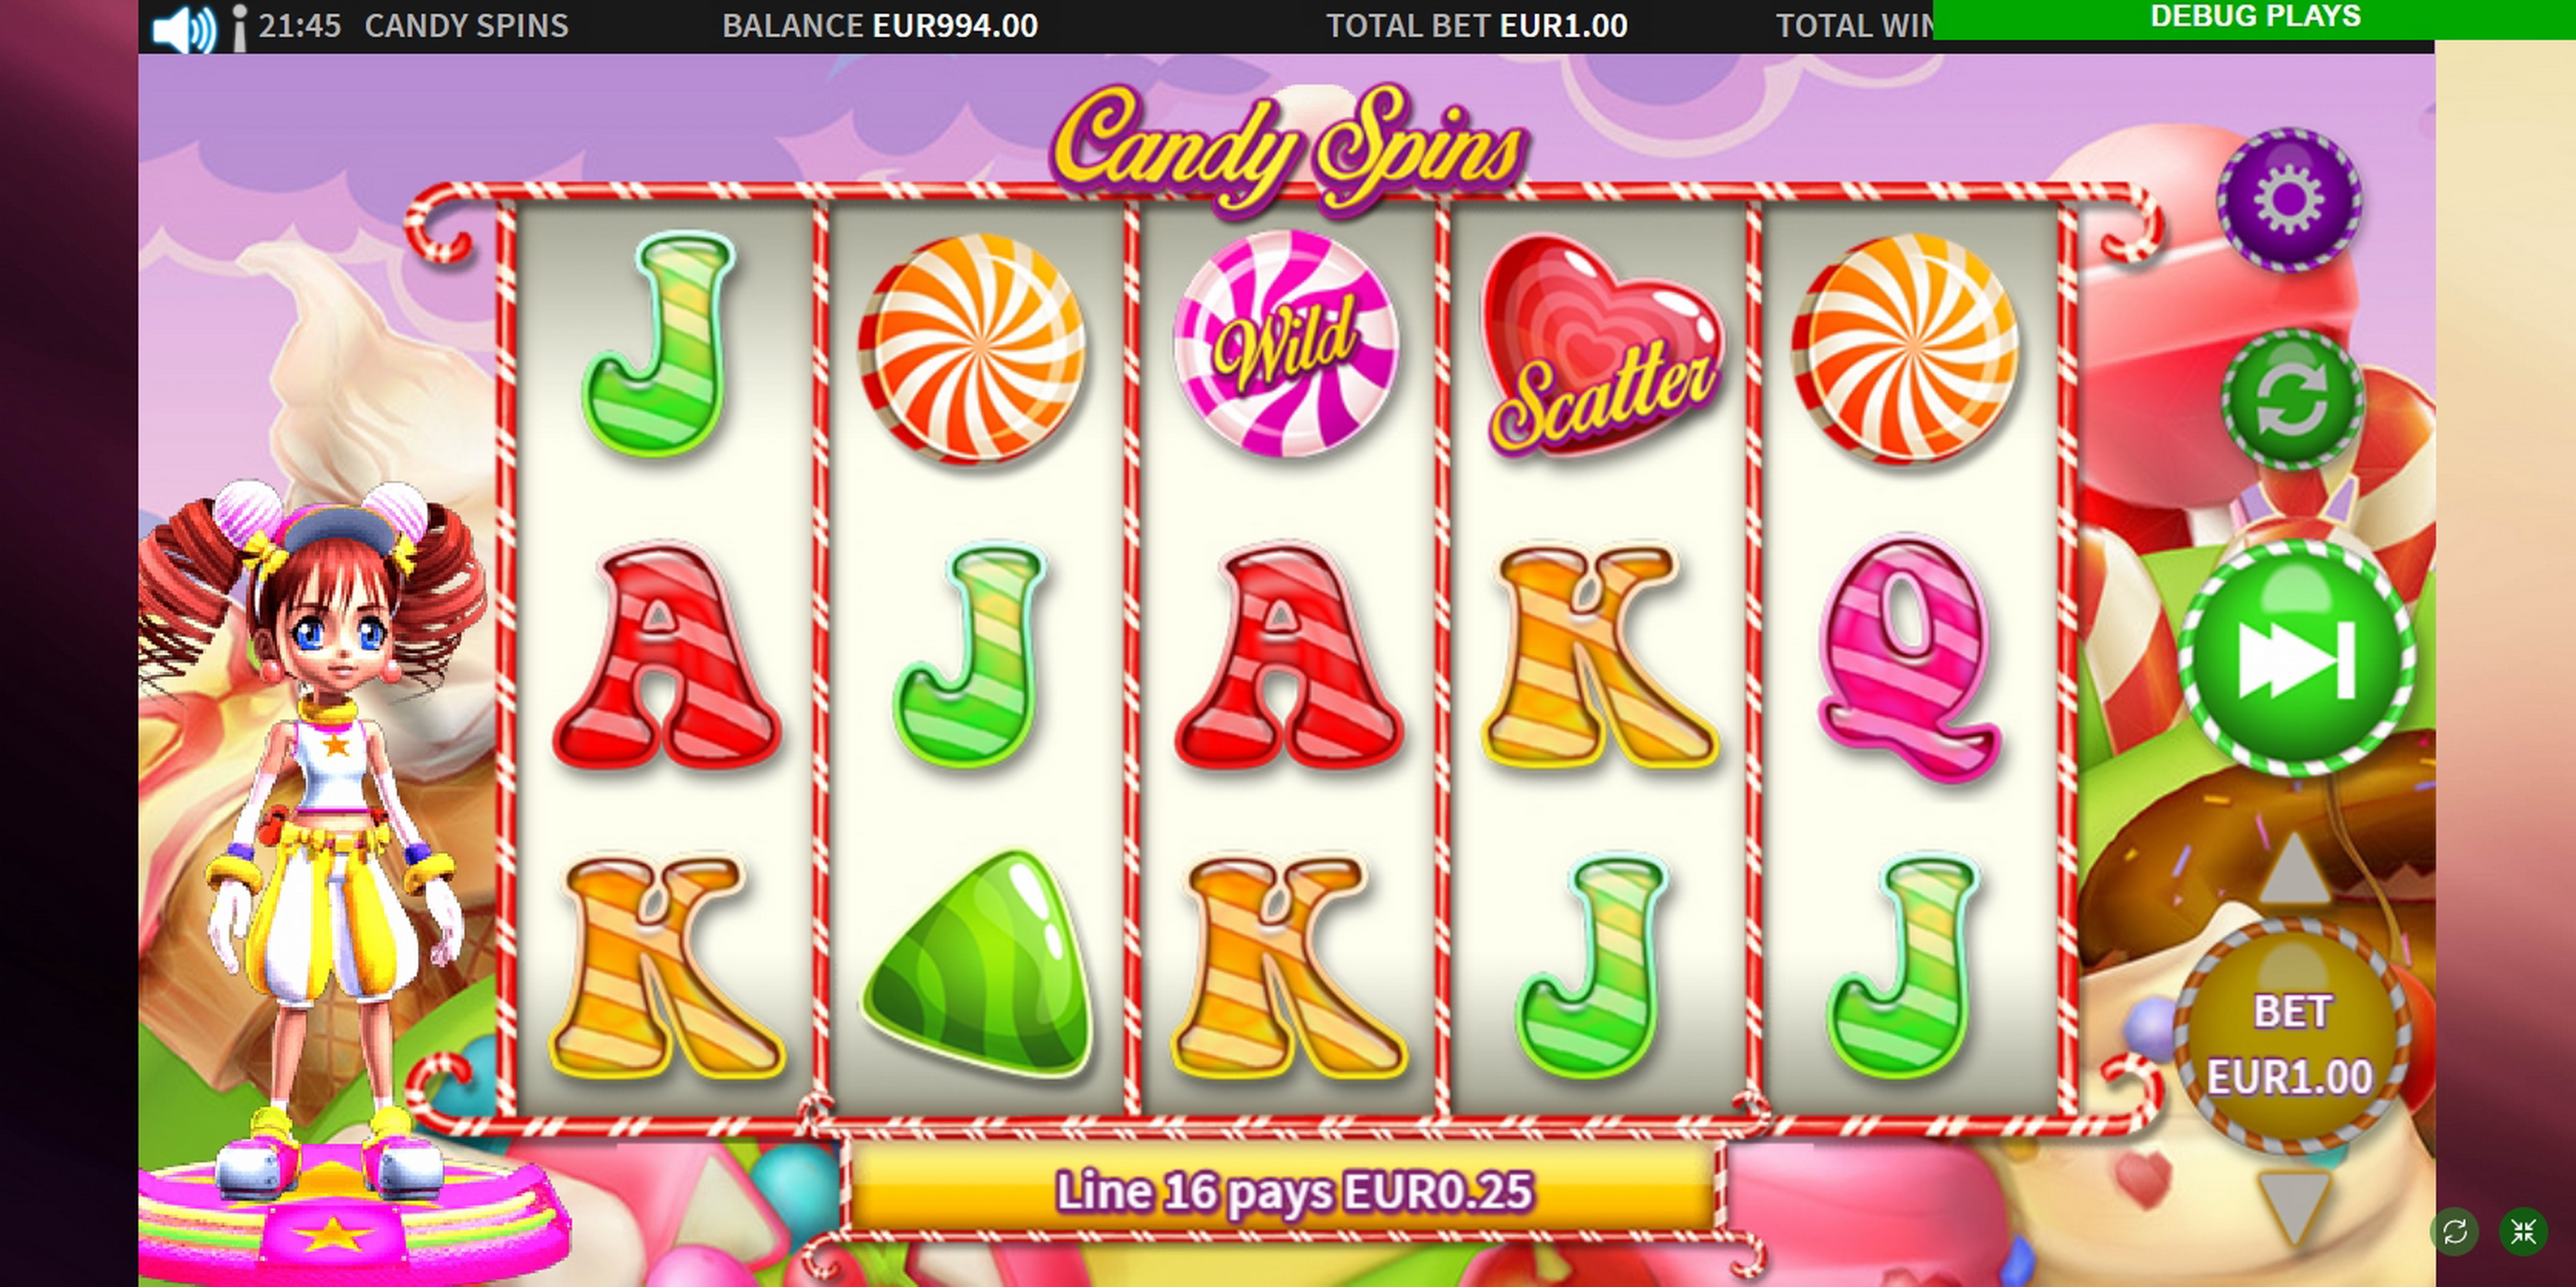 Win Money in Candy Spins Free Slot Game by MetaGU